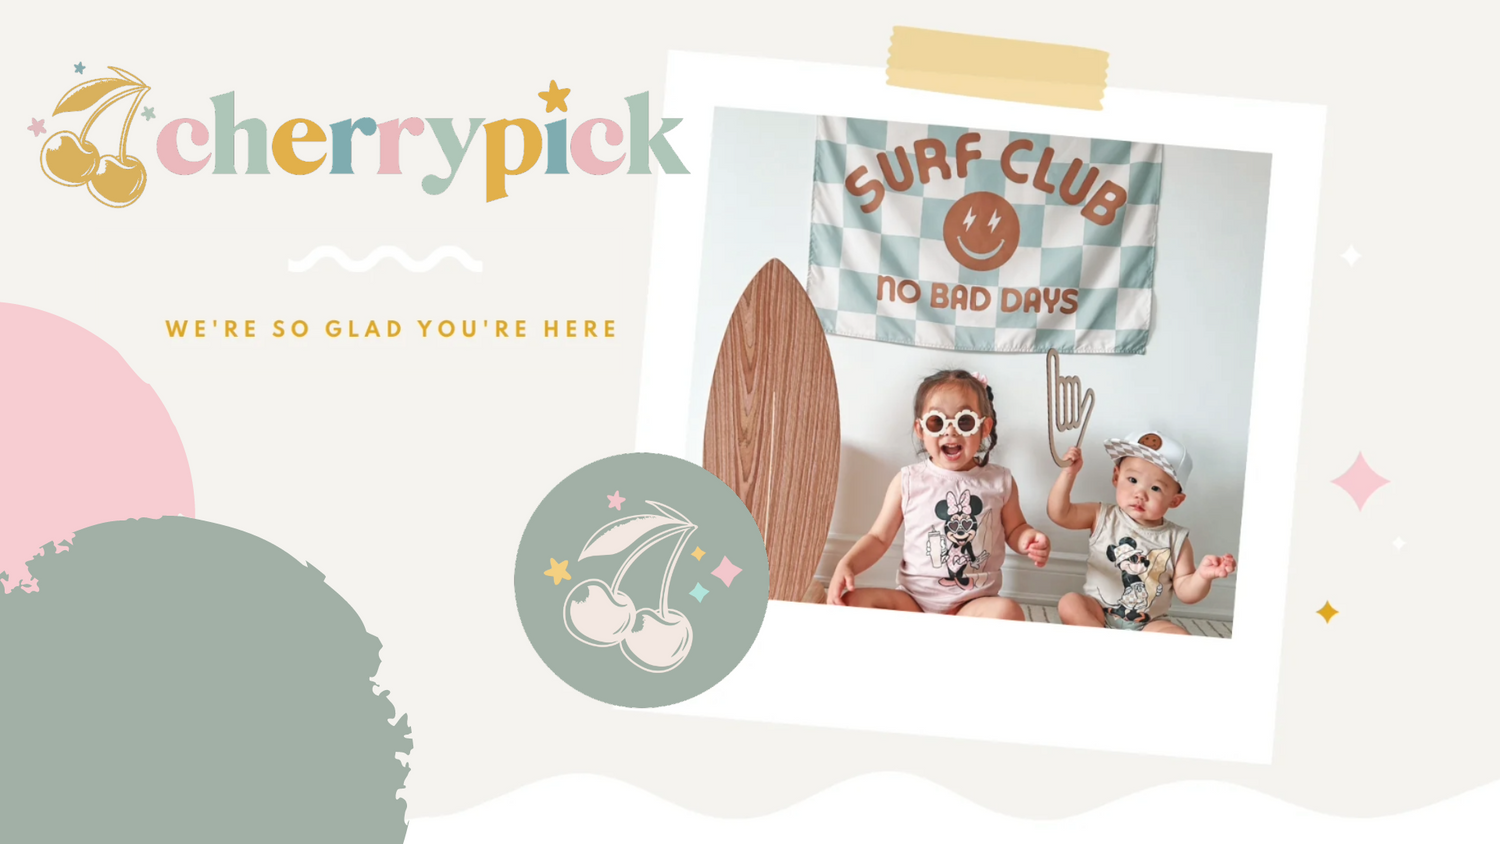 Cherrypick Canadian banners and home decor for playrooms and nurseries